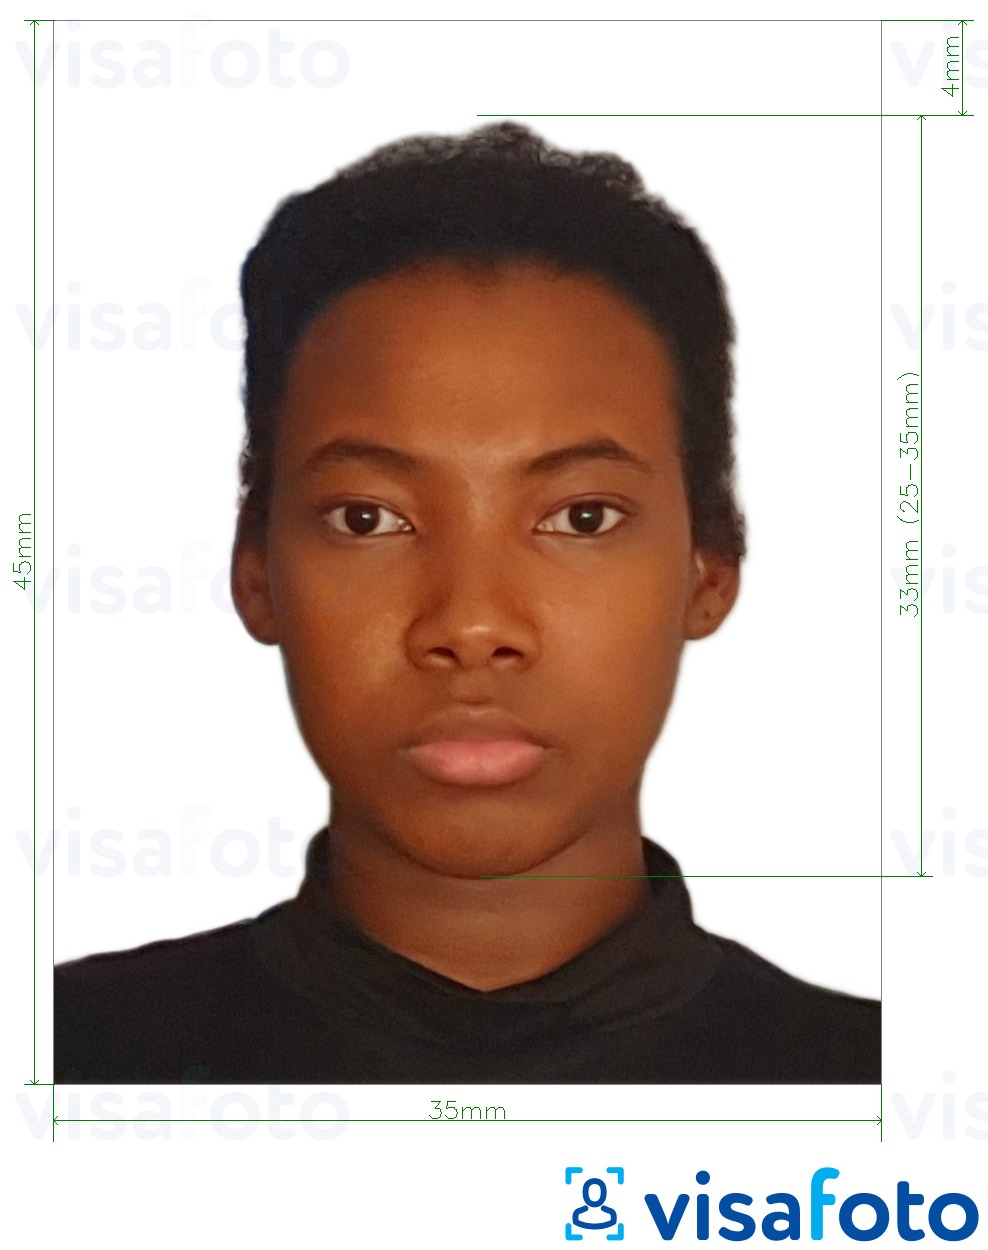 Example of photo for Jamaica passport 35x45 mm (3.5x4.5 cm) with exact size specification